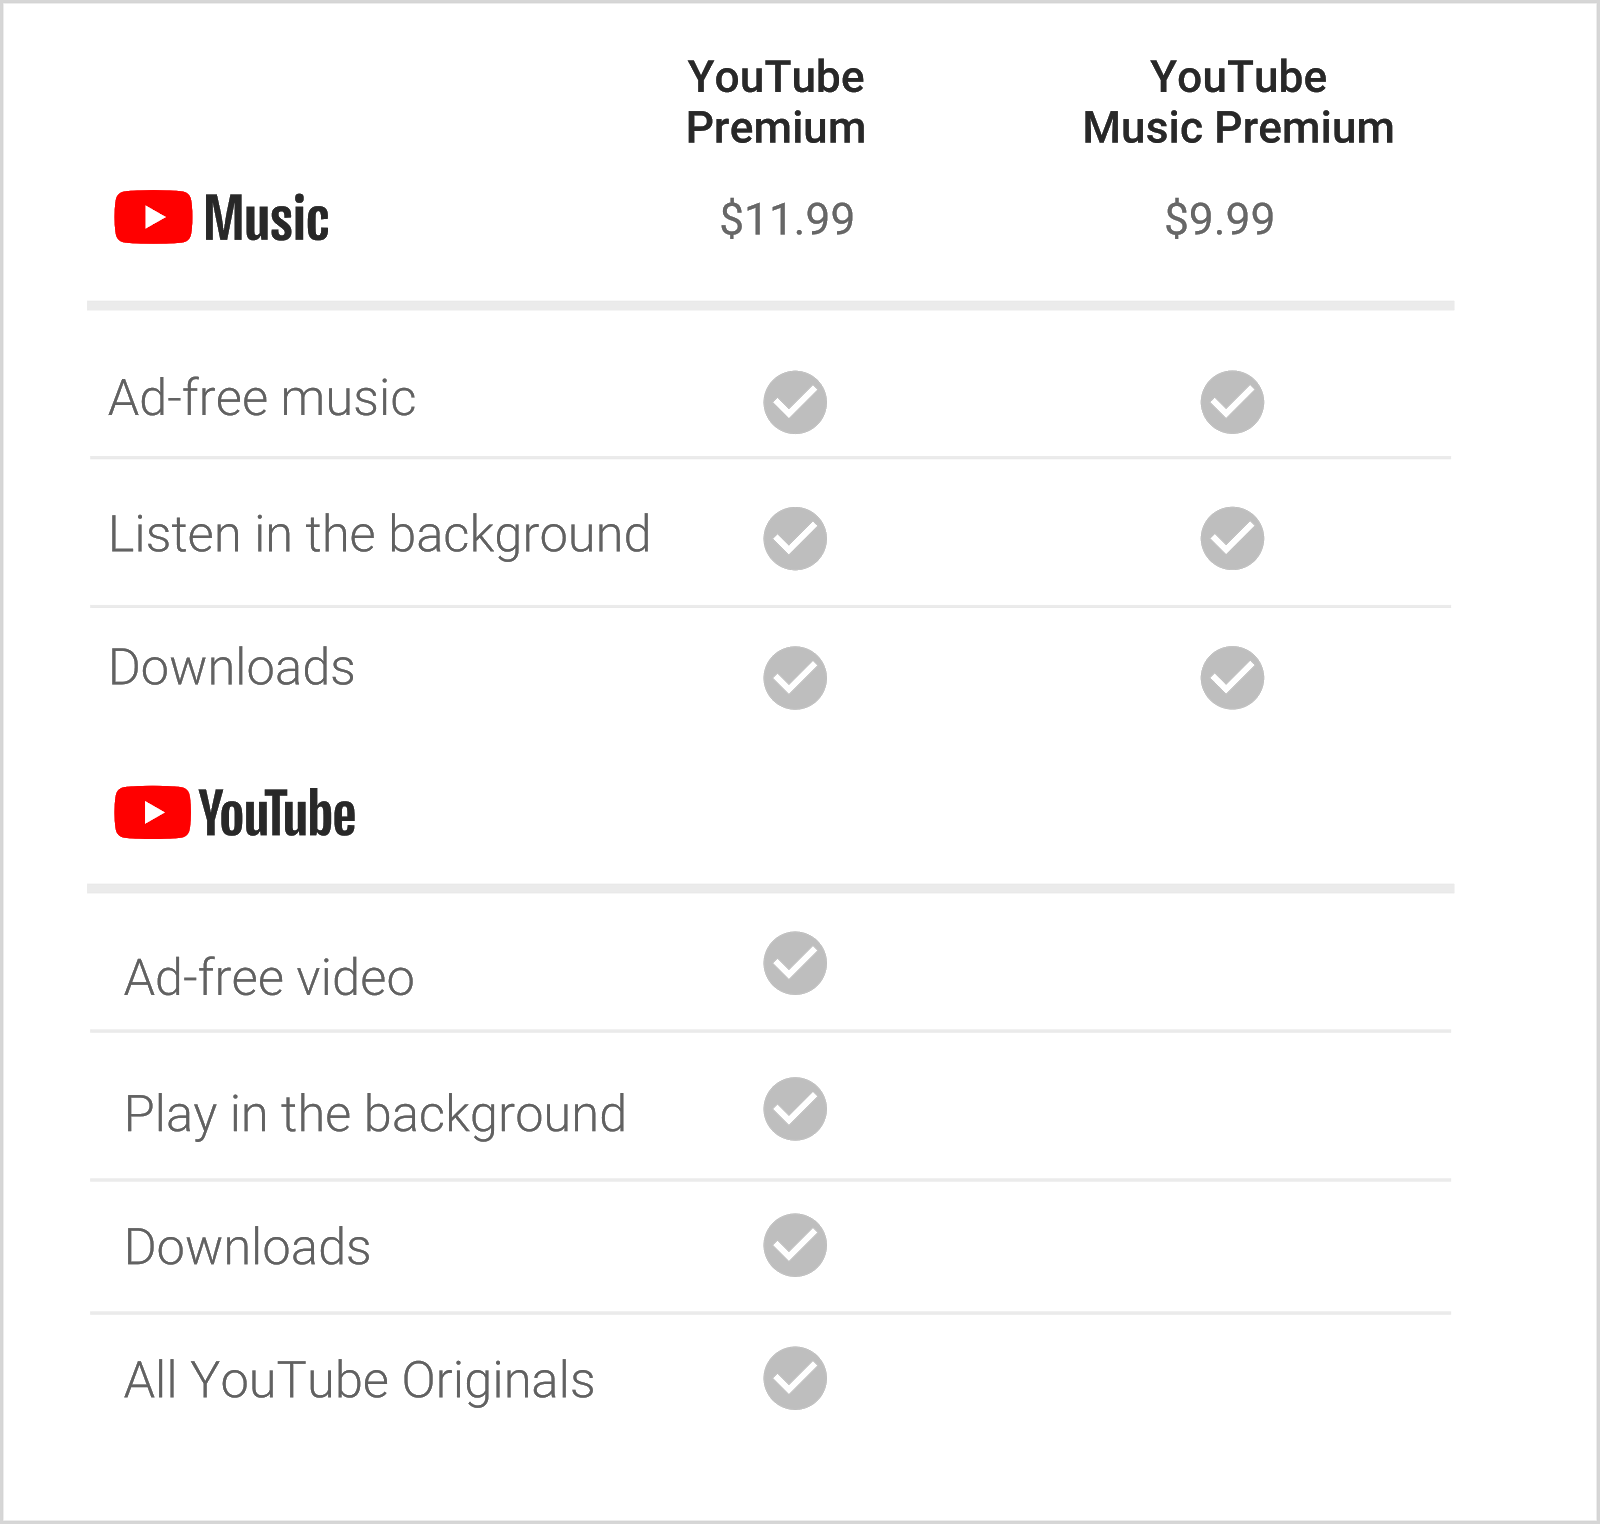 New YouTube Music Premium costs $9.99 monthly, add $2 to get all Red perks  | Ars Technica